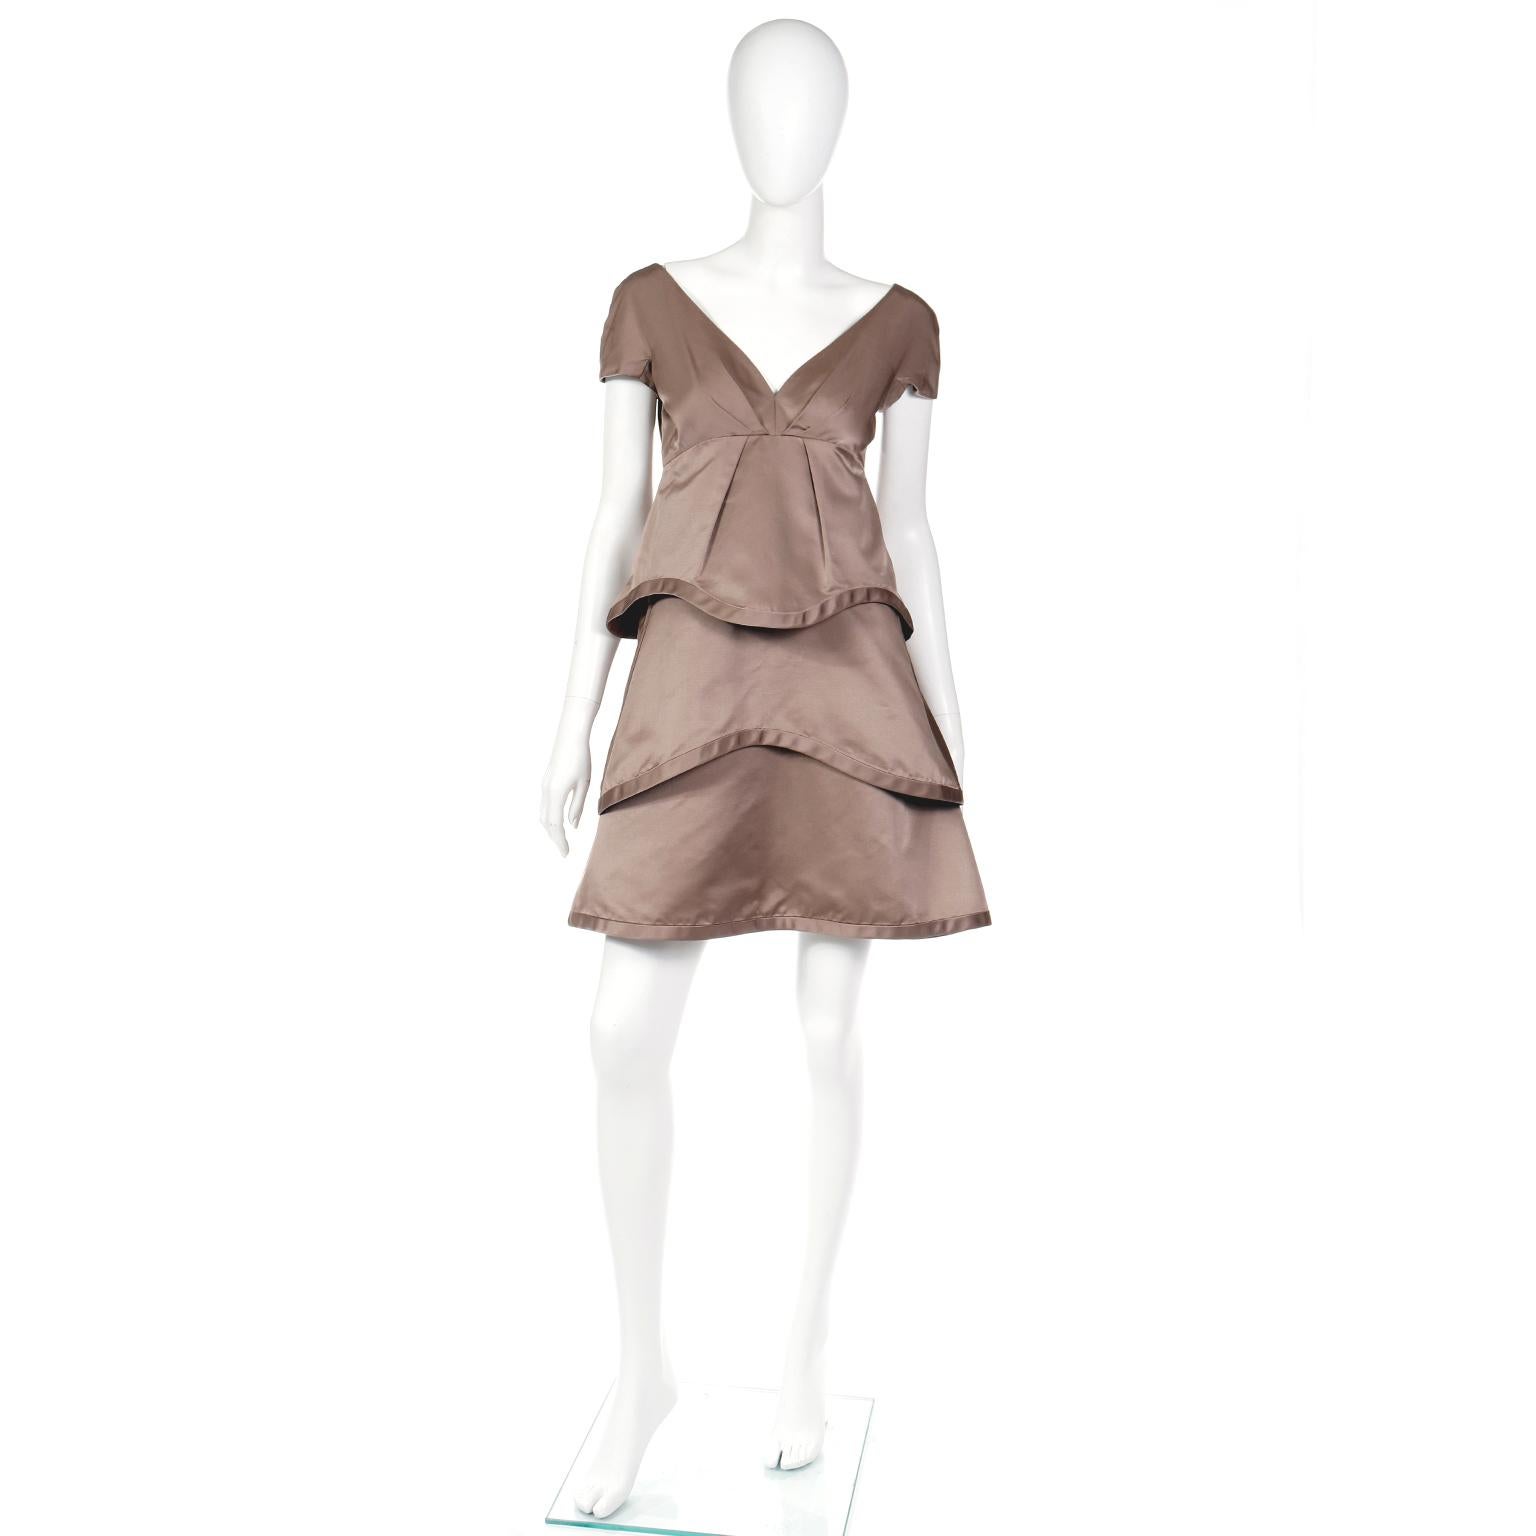 This is a beautiful Marc Jacobs light toffee brown silk dress from the 2000s with tiered skirt and a structured lining that gives the skirt volume. It has beautiful pleating in the bodice and along the empire waist. This dress has a deep v neck and